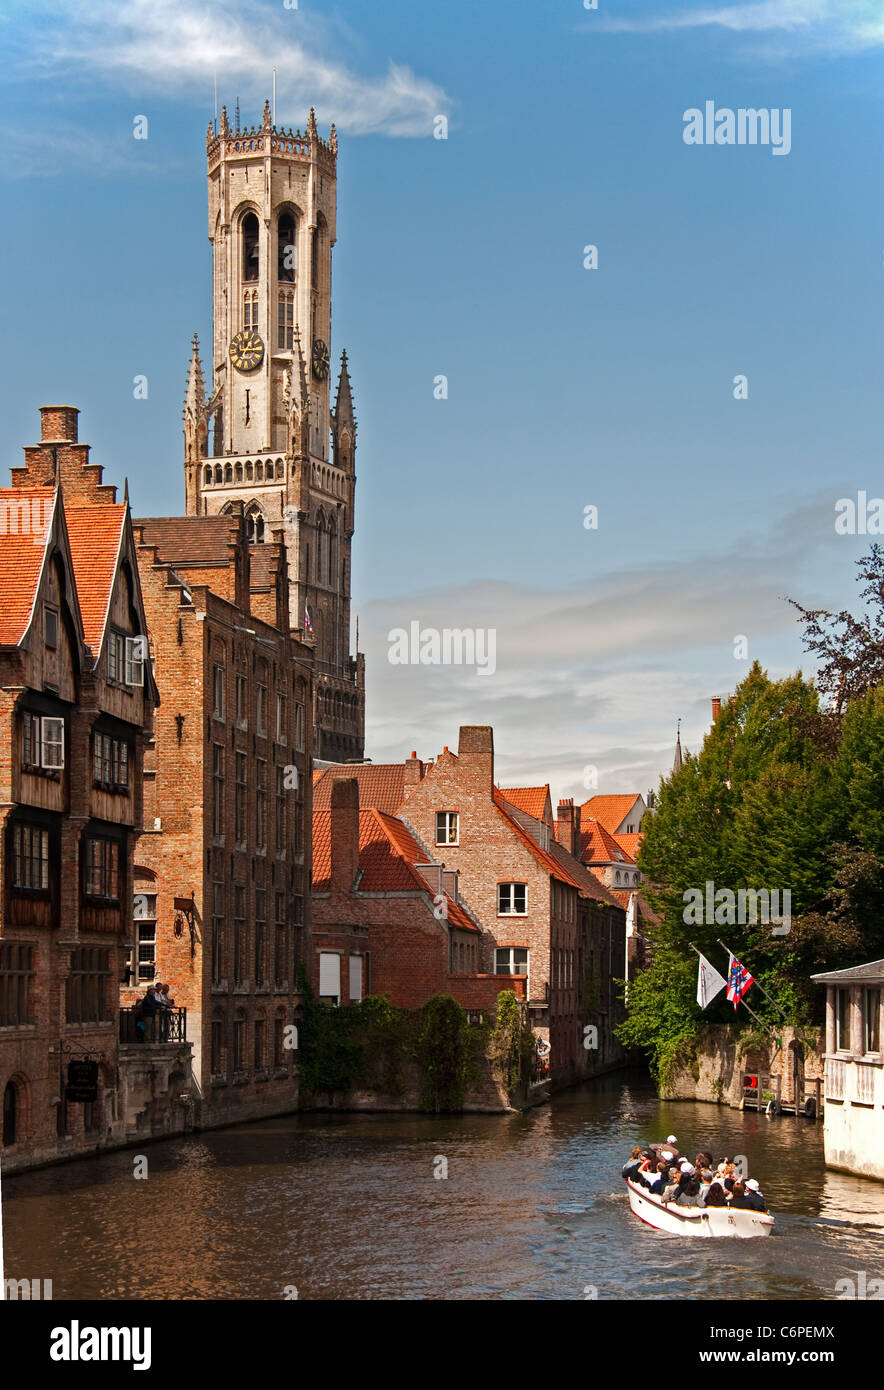 Medieval architecture of Bruges (Brugge) is dominated by the Belfort (belfry tower) as seen across canal from Dijver Stock Photo